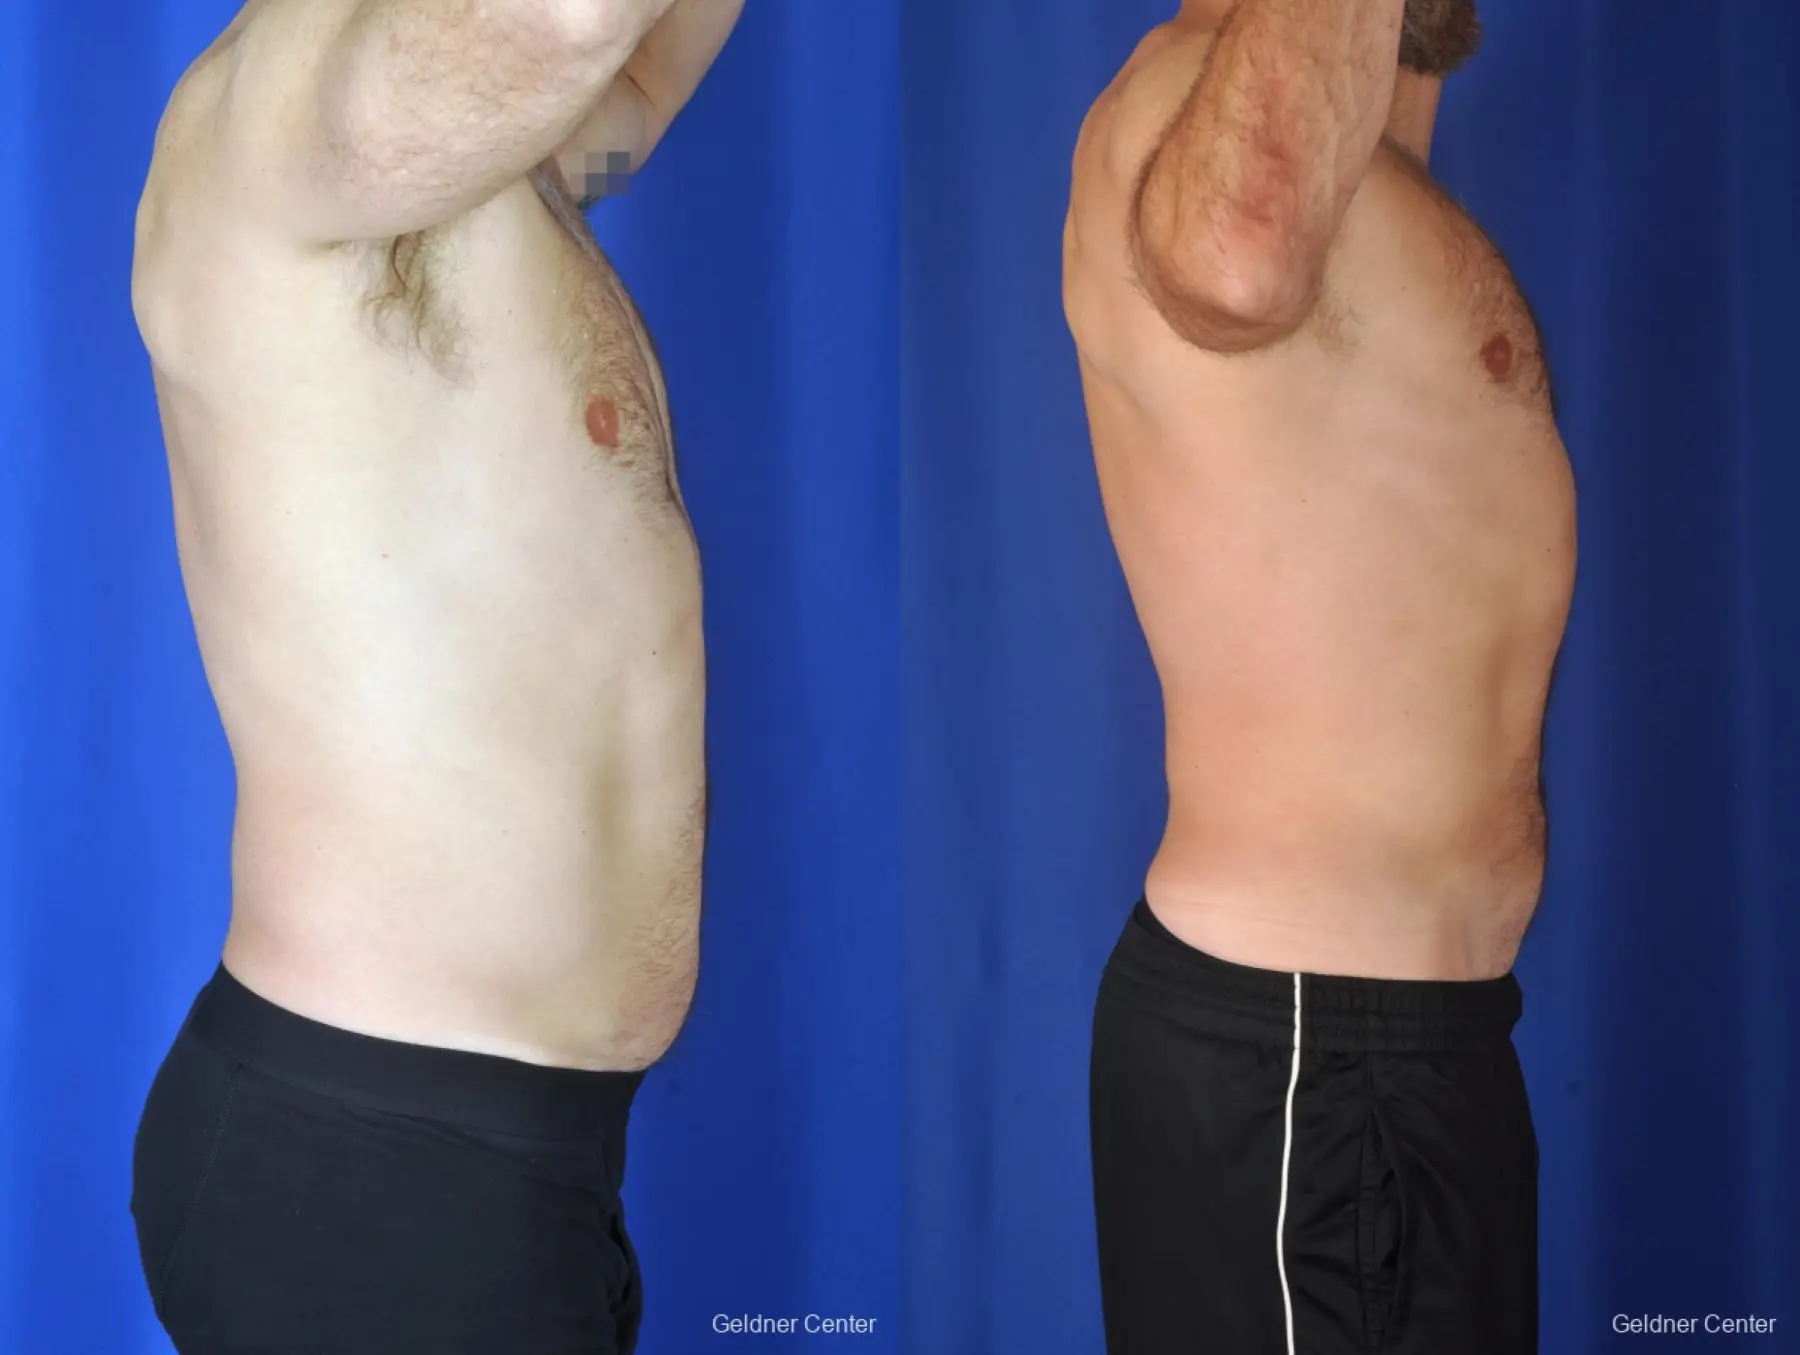 Liposuction For Men: Patient 7 - Before and After 3